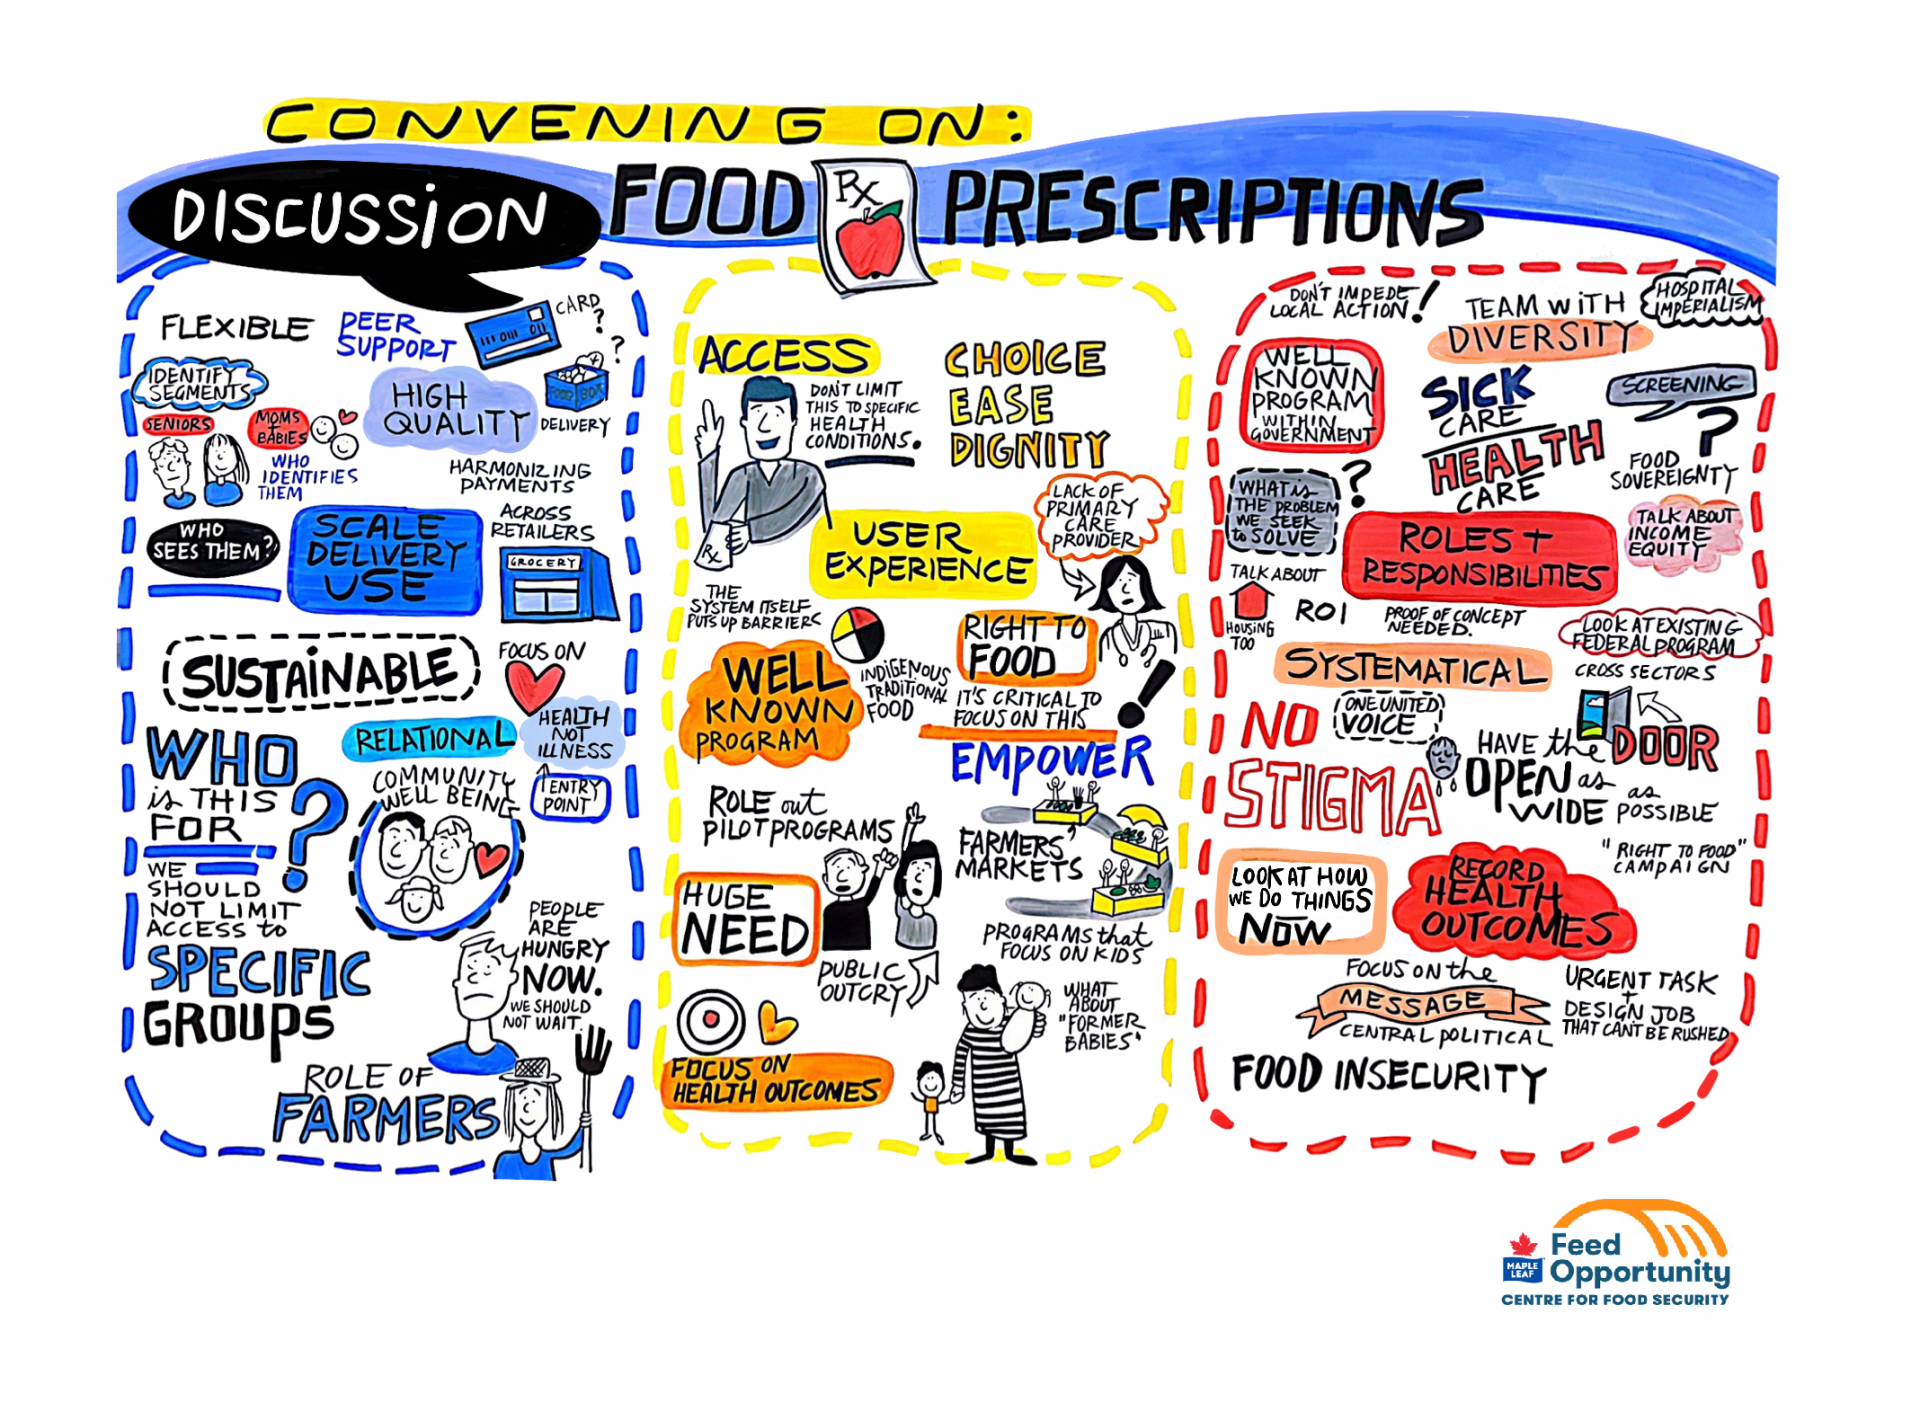 A three fold board with graphic recording from a June 14th 2023 event on food prescriptions, hosted by the Maple Leaf Centre for Food Security. The three boards outline the discussion that took place, including how to scale food prescription programs, how to improve the user experience, and what roles and responsibilities there are for the healthcare system, nonprofit actors, and others.